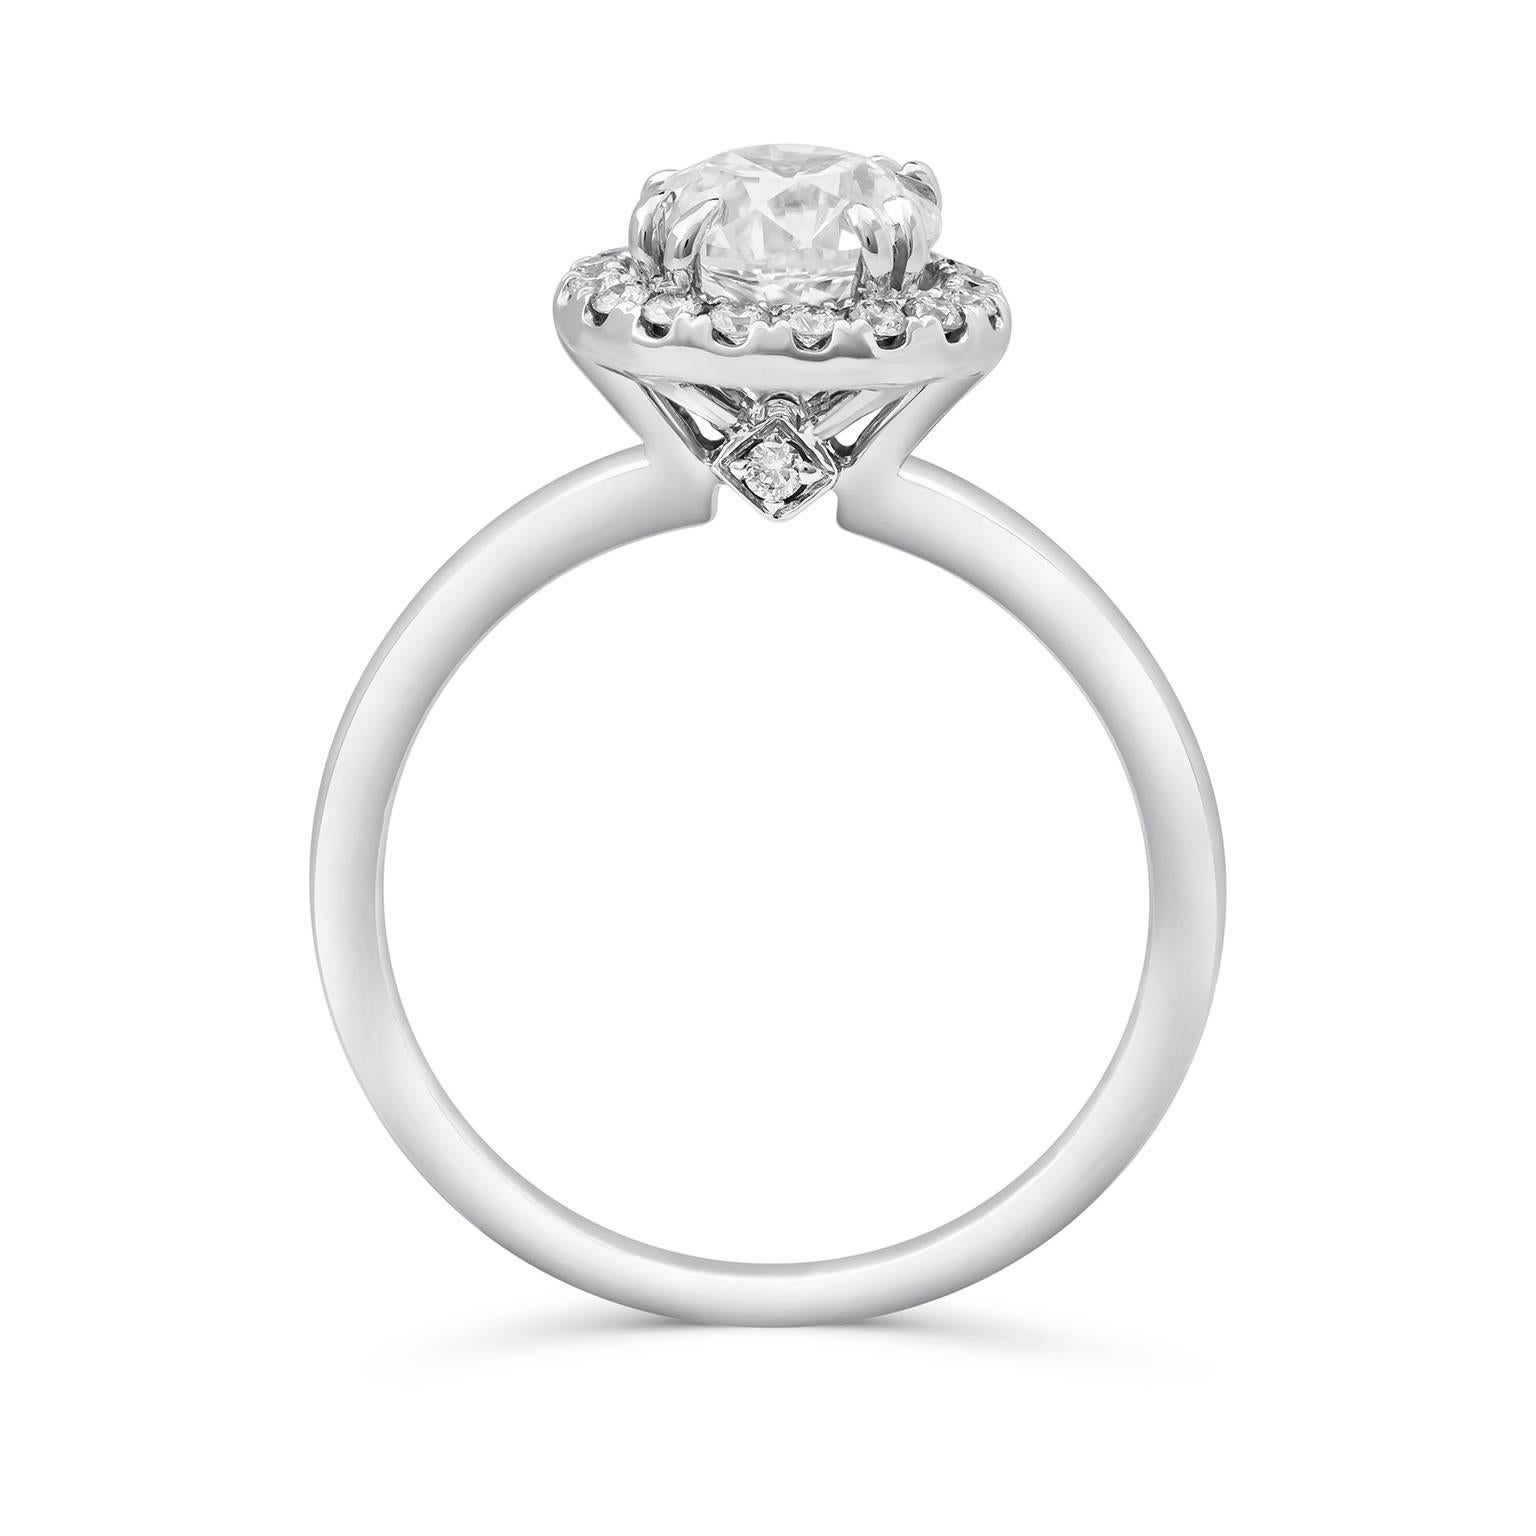 AA classic and timeless engagement ring style showcasing a 1.20 carats round diamond that GIA certified as D color, SI2 in clarity. Set in a seamless eight prong halo design accented with 0.20 carats of brilliant round diamonds. Finely made in 18K